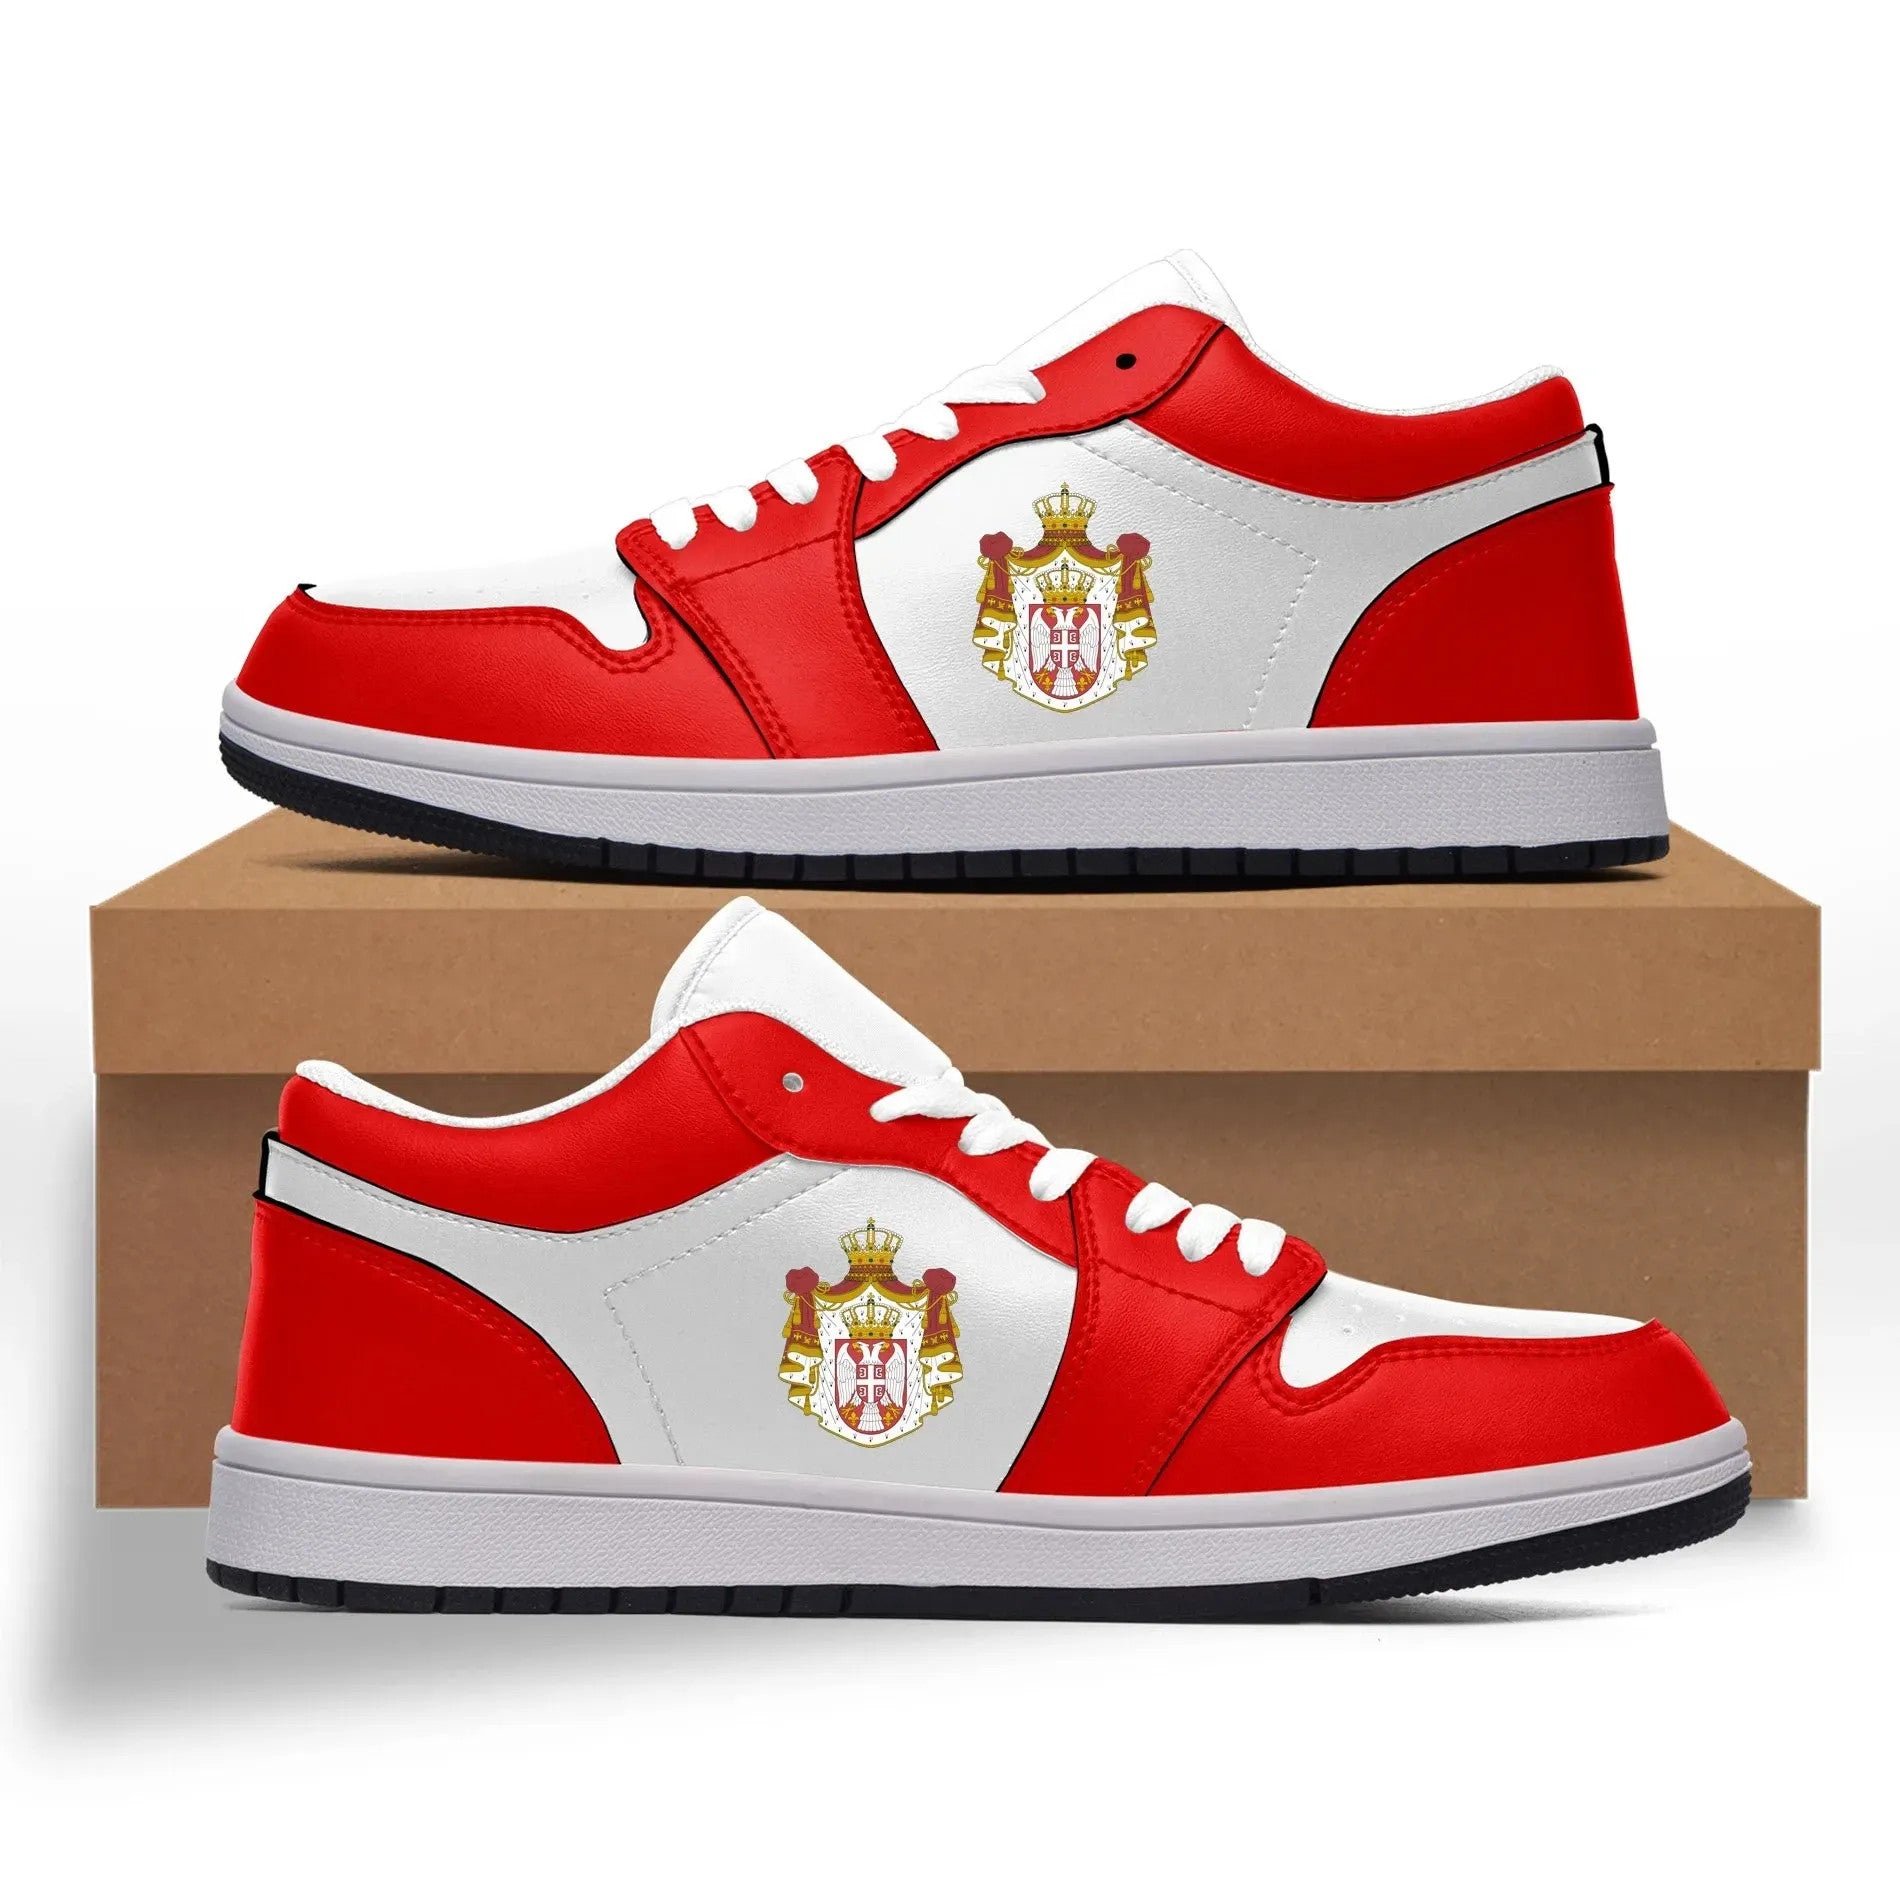 serbia-low-gym-red-white-sneakers